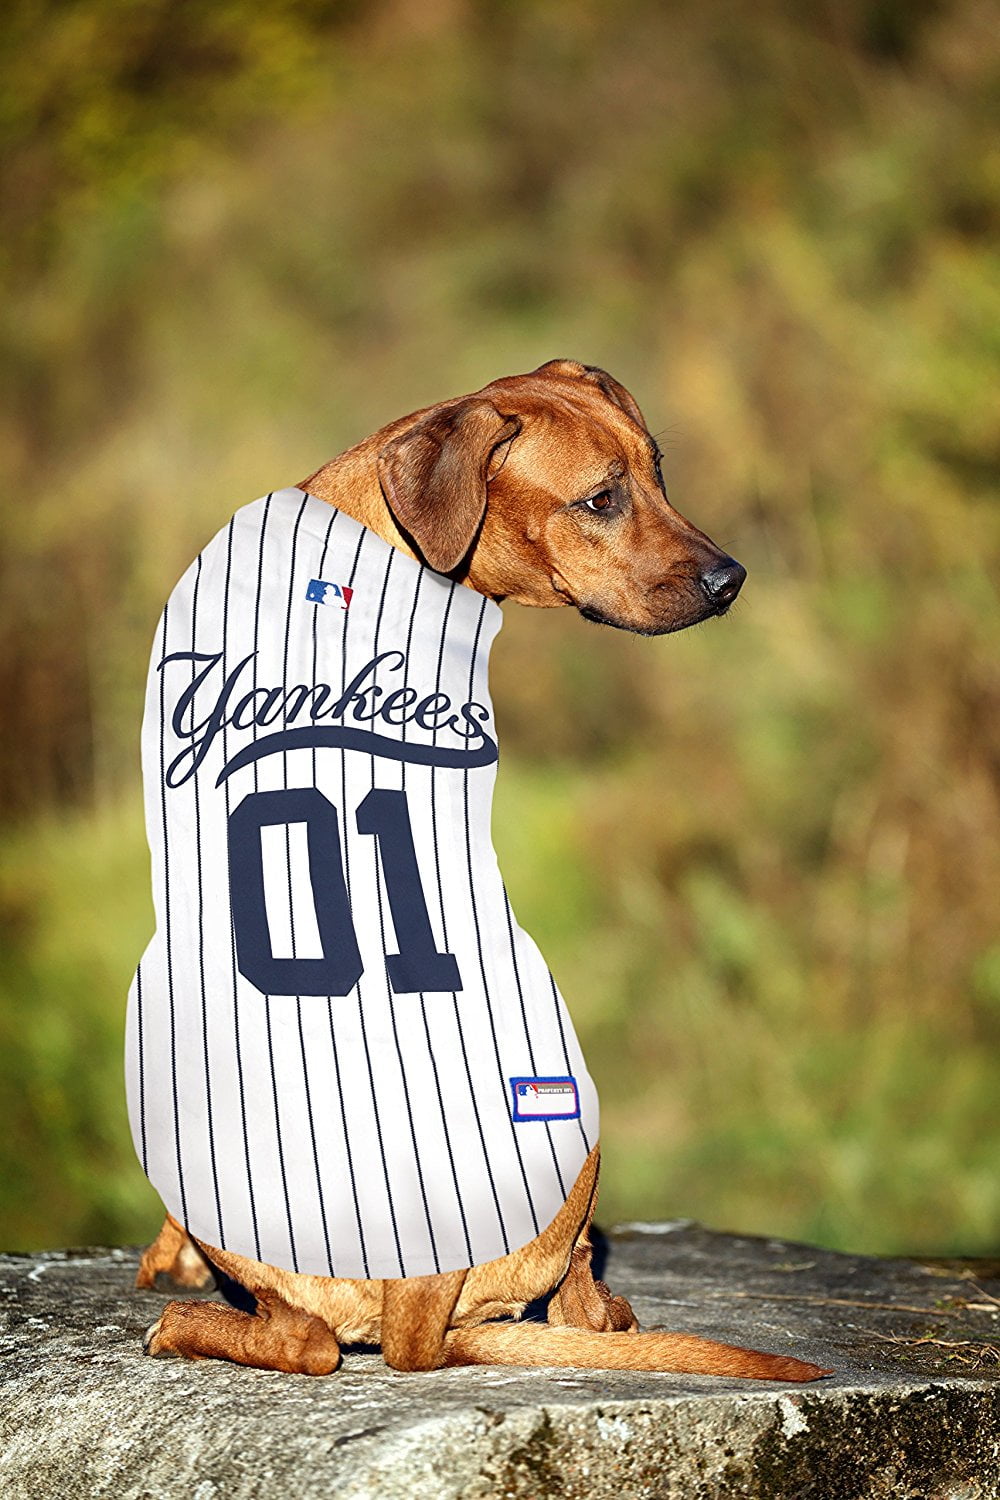  Pets First MLB New York Yankees Reversible T-Shirt, Large for  Dogs & Cats. A Pet Shirt with The Team Logo That Comes with 2 Designs;  Stripe Tee Shirt on one